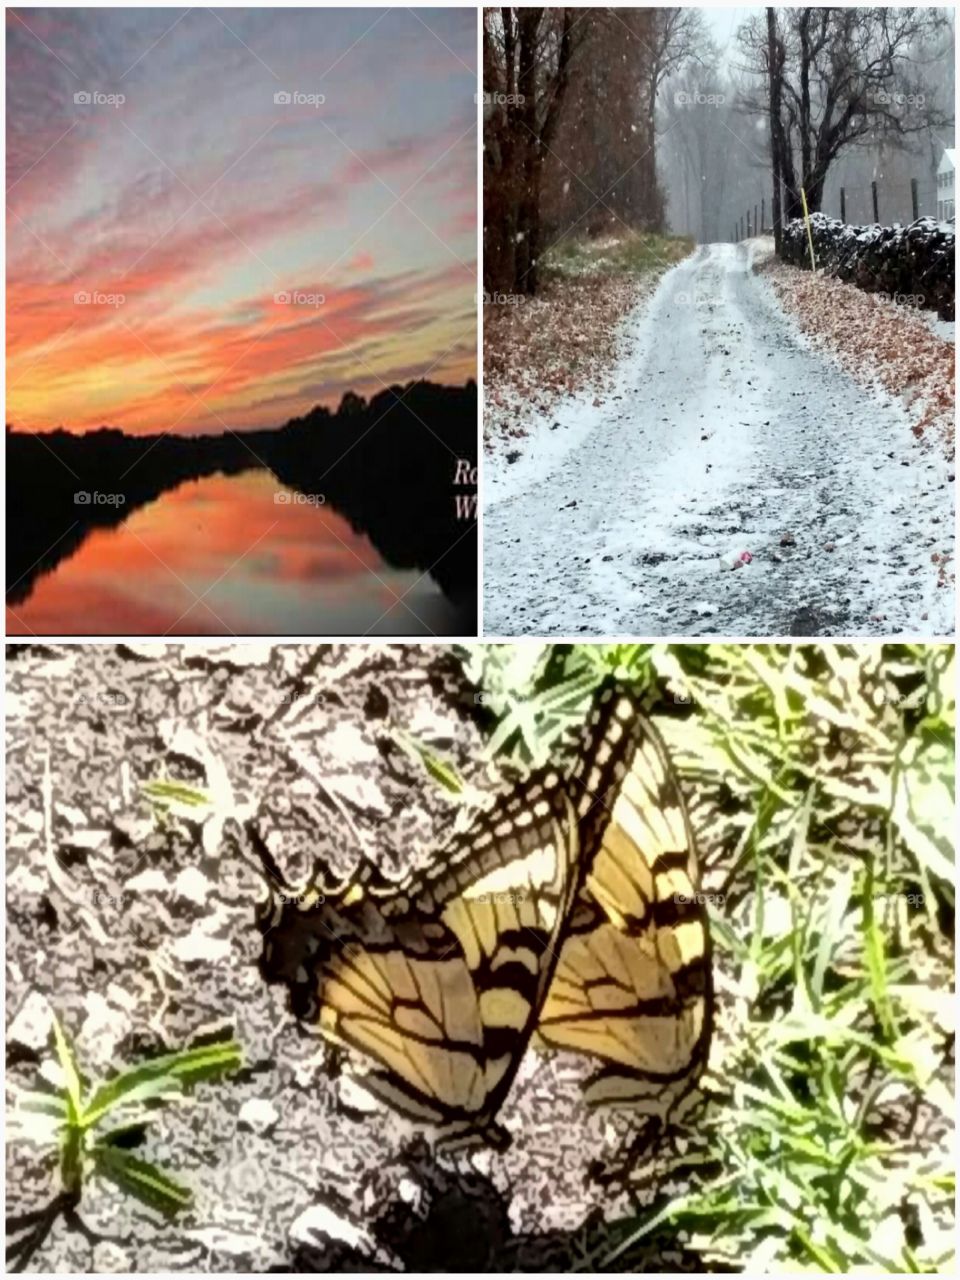 Different seasons in Ga and Md. The butterfly is enjoying spring